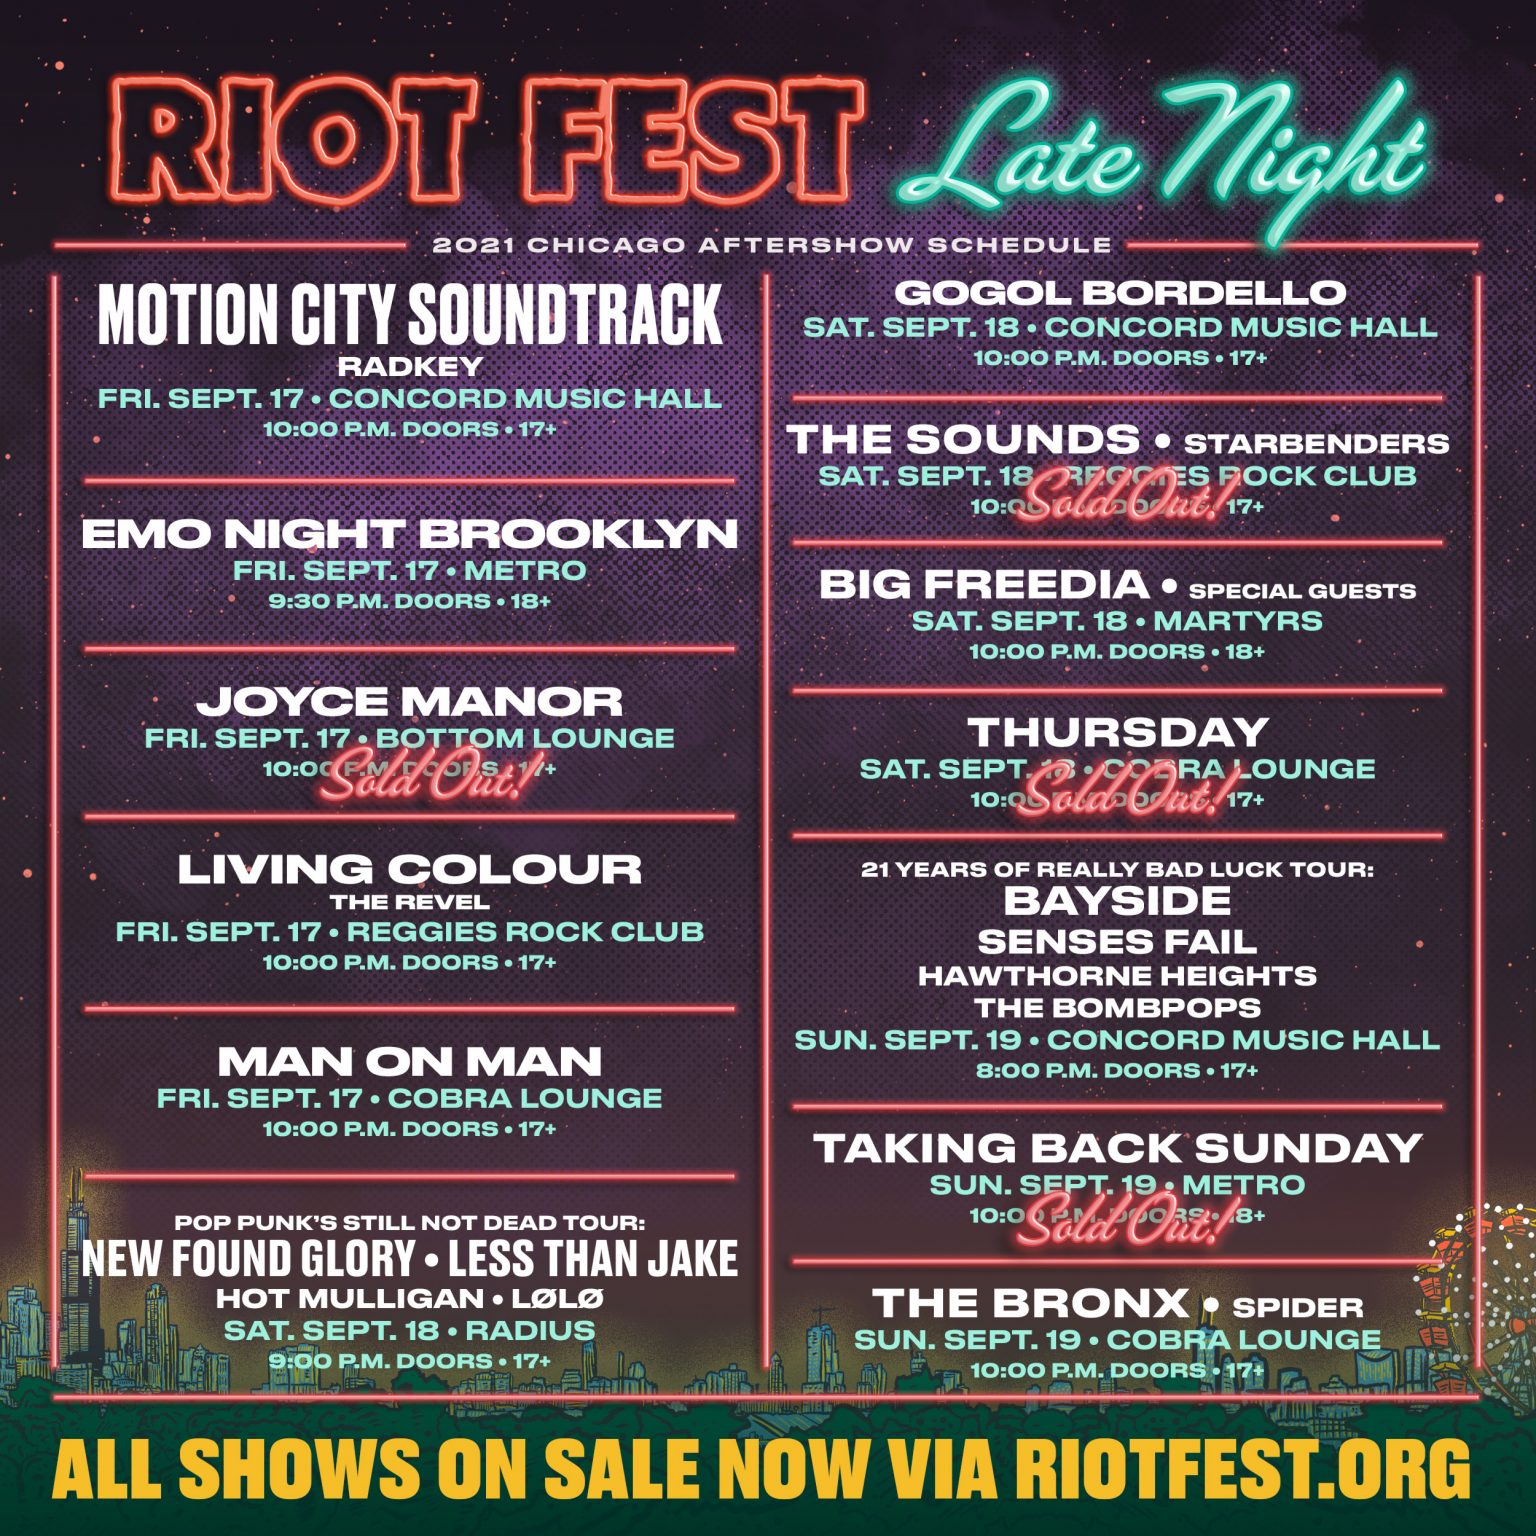 Check Out Our Full Schedule of Riot Fest 2021 Late Night Shows